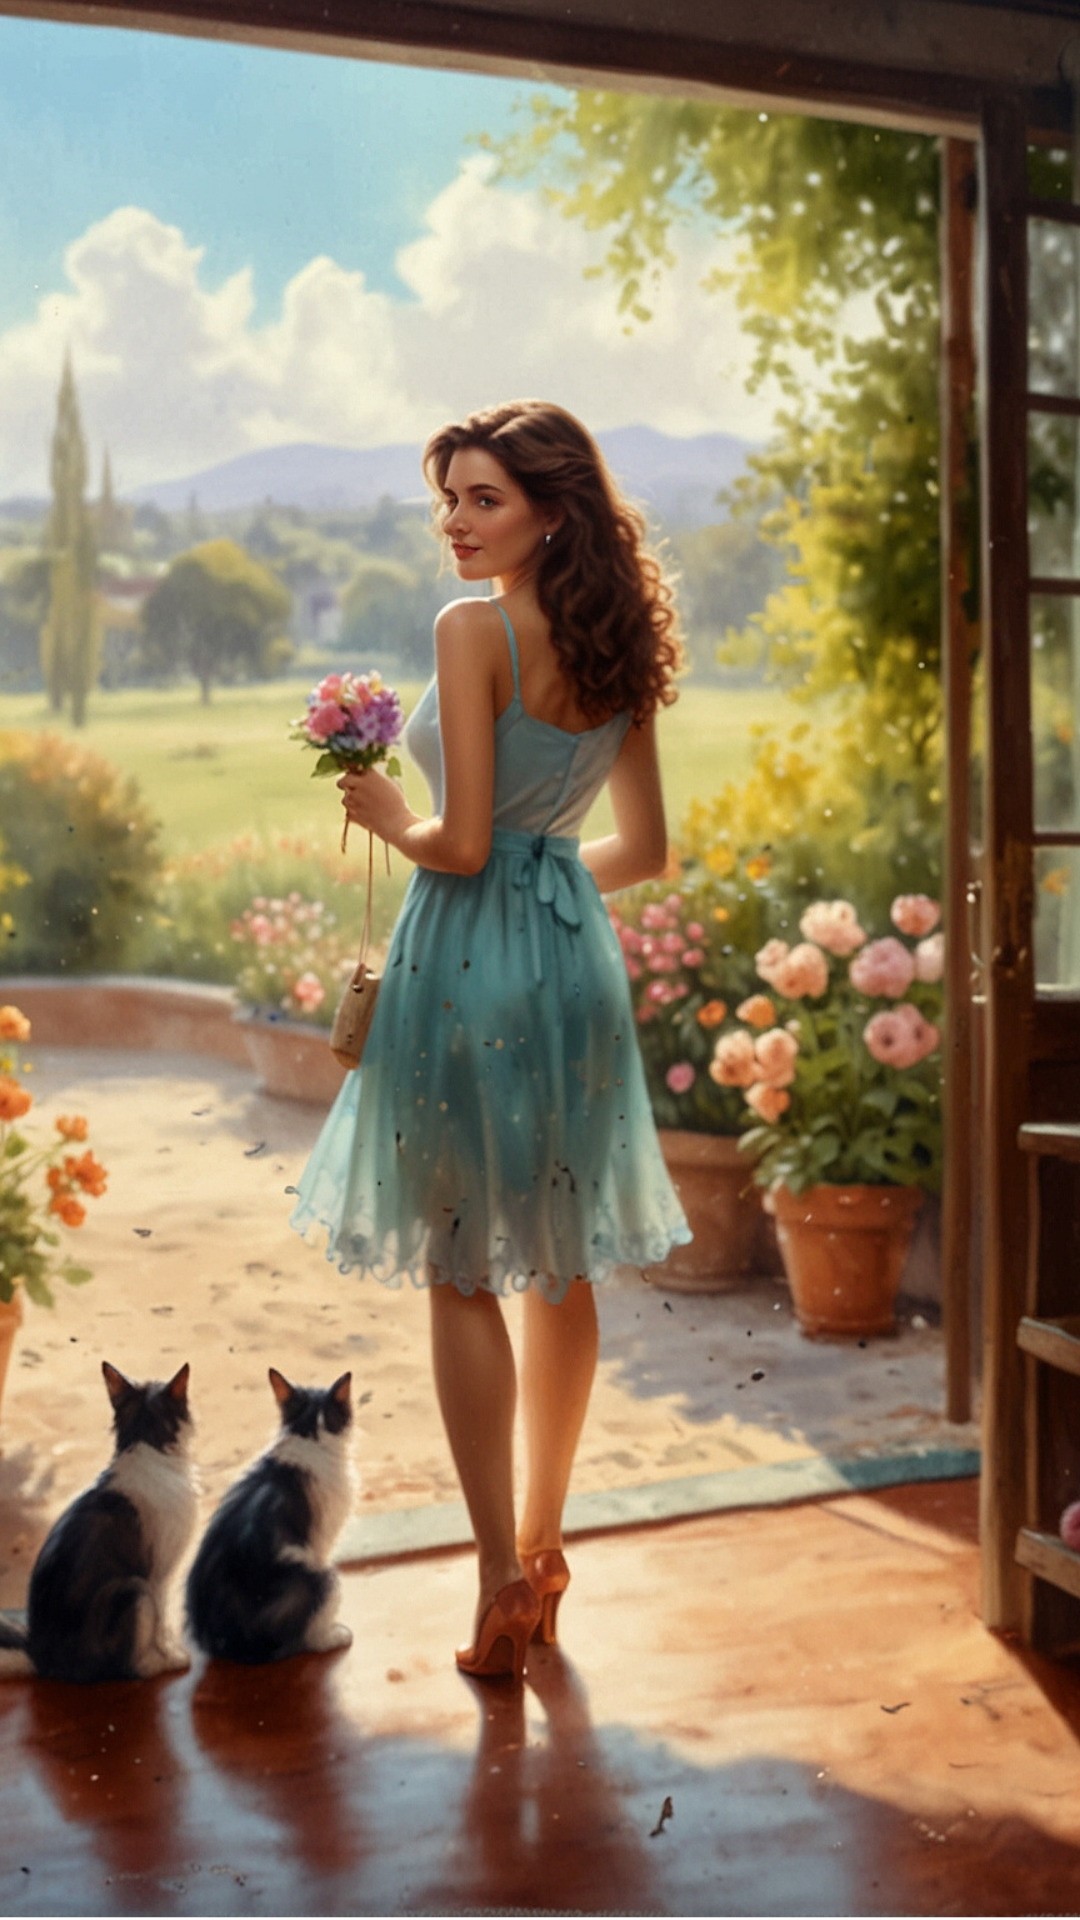 Countryside Charm - Floral Whispers and Feline Friends